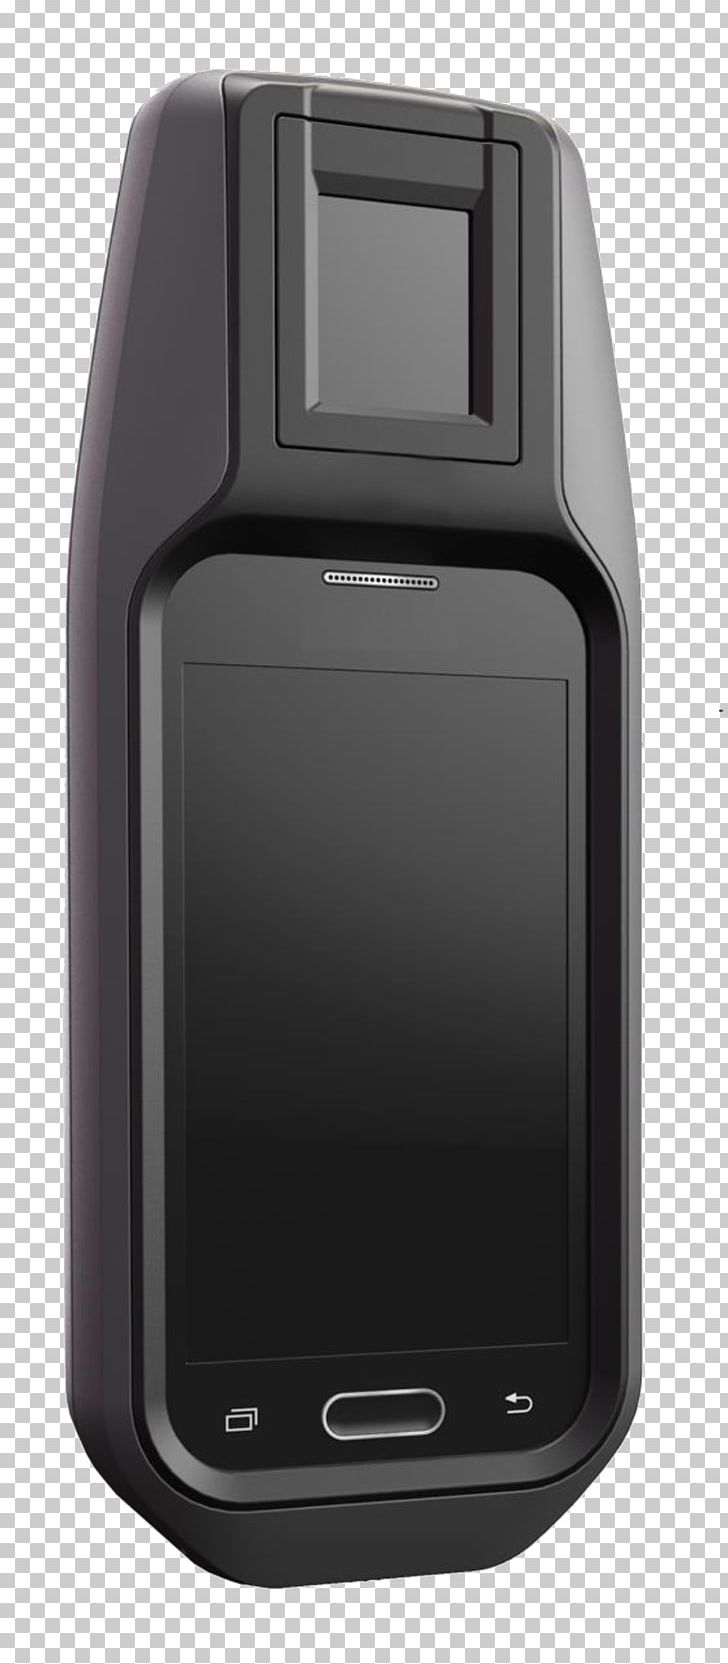 Feature Phone Mobile Phones Fingerprint Smartphone Police PNG, Clipart, Biometrics, Communication Device, Crime, Electronic Device, Electronics Free PNG Download